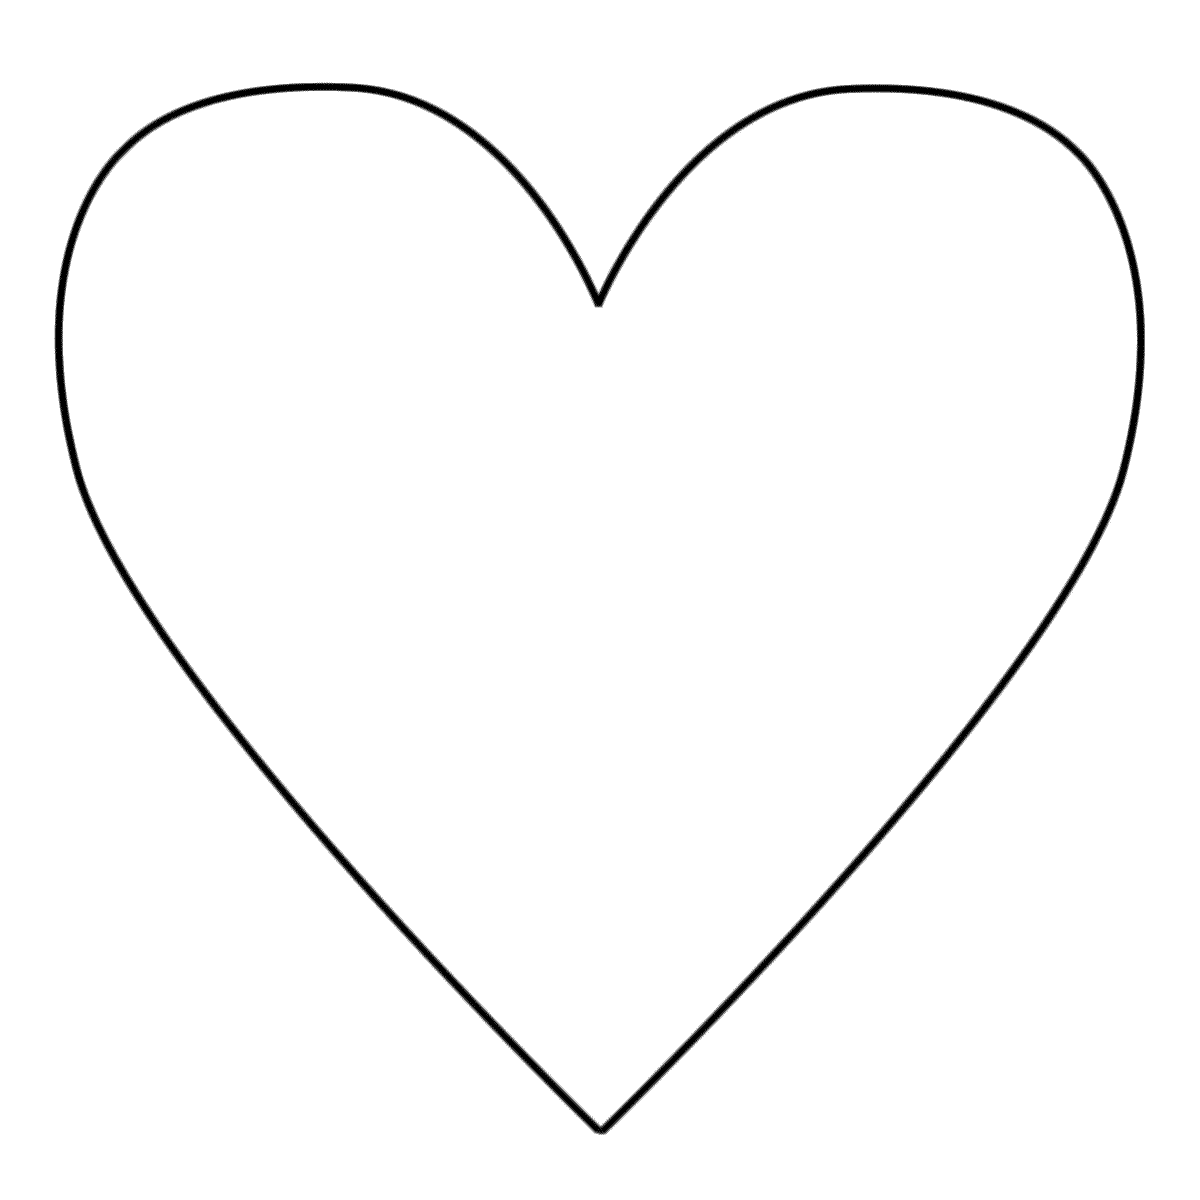 12 Valentine Heart Coloring Pages - Printable Coloring Pages